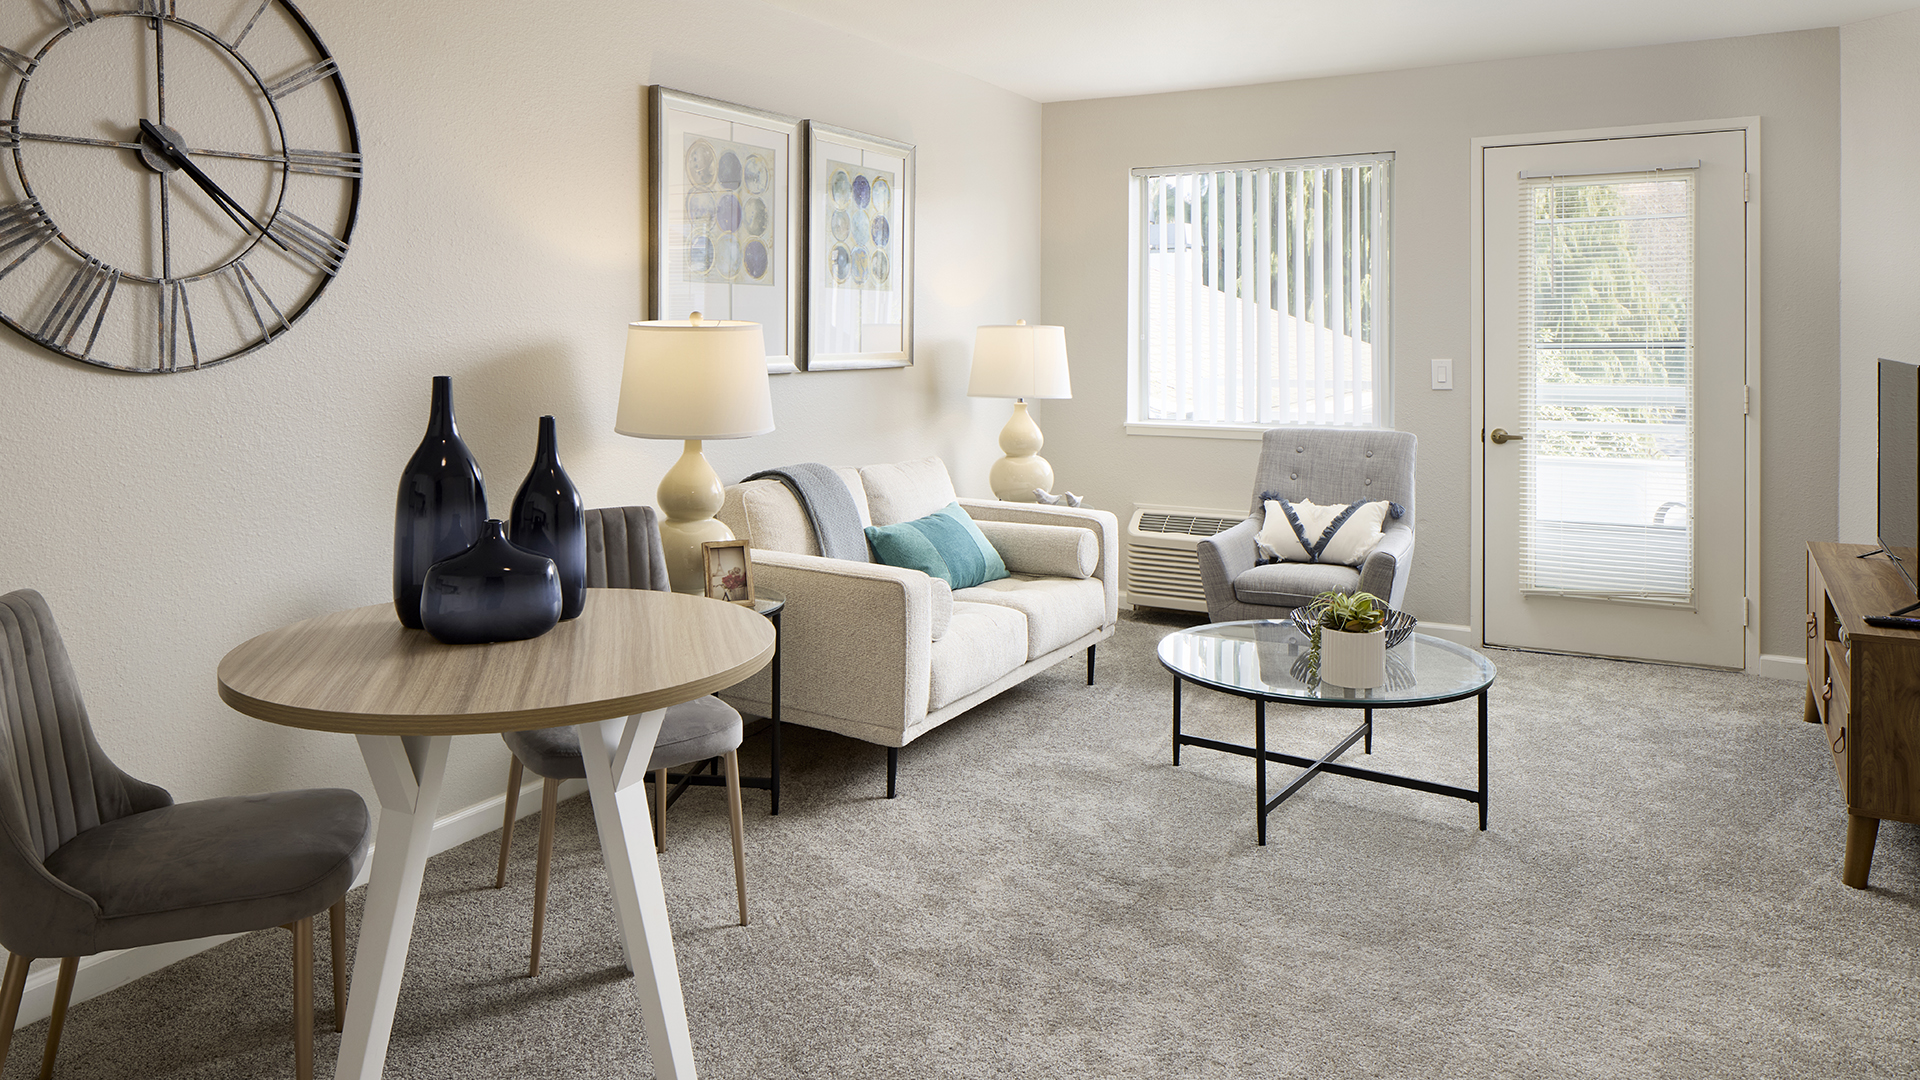 A bright and neatly furnished Holiday Bellevue Garden apartment living room with a cohesive color scheme, featuring a comfortable sofa, an armchair, a round coffee table, and decorative accents.